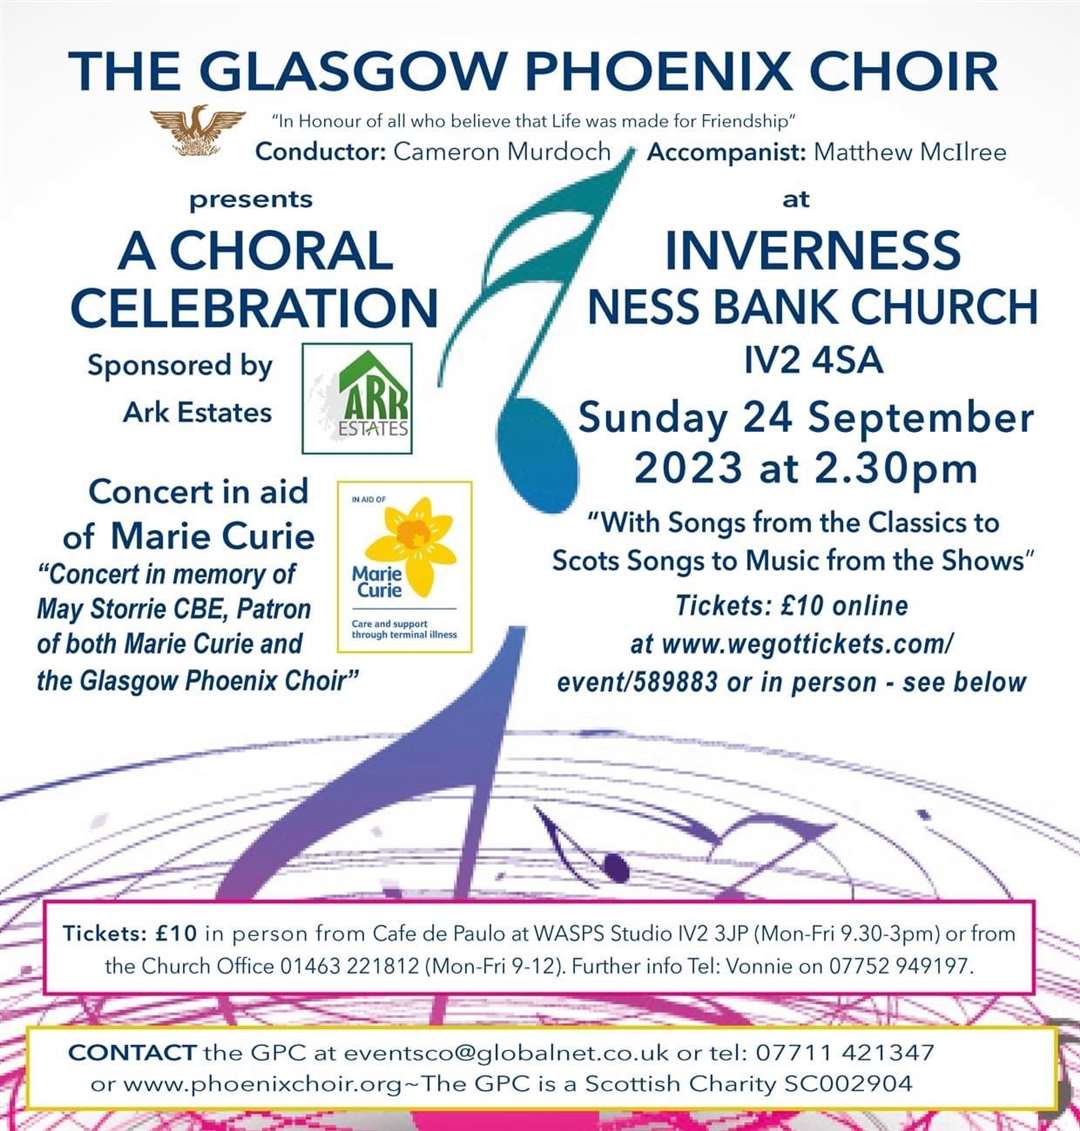 The Glasgow Phoenix Choir perform at Ness Bank Church, Inverness.